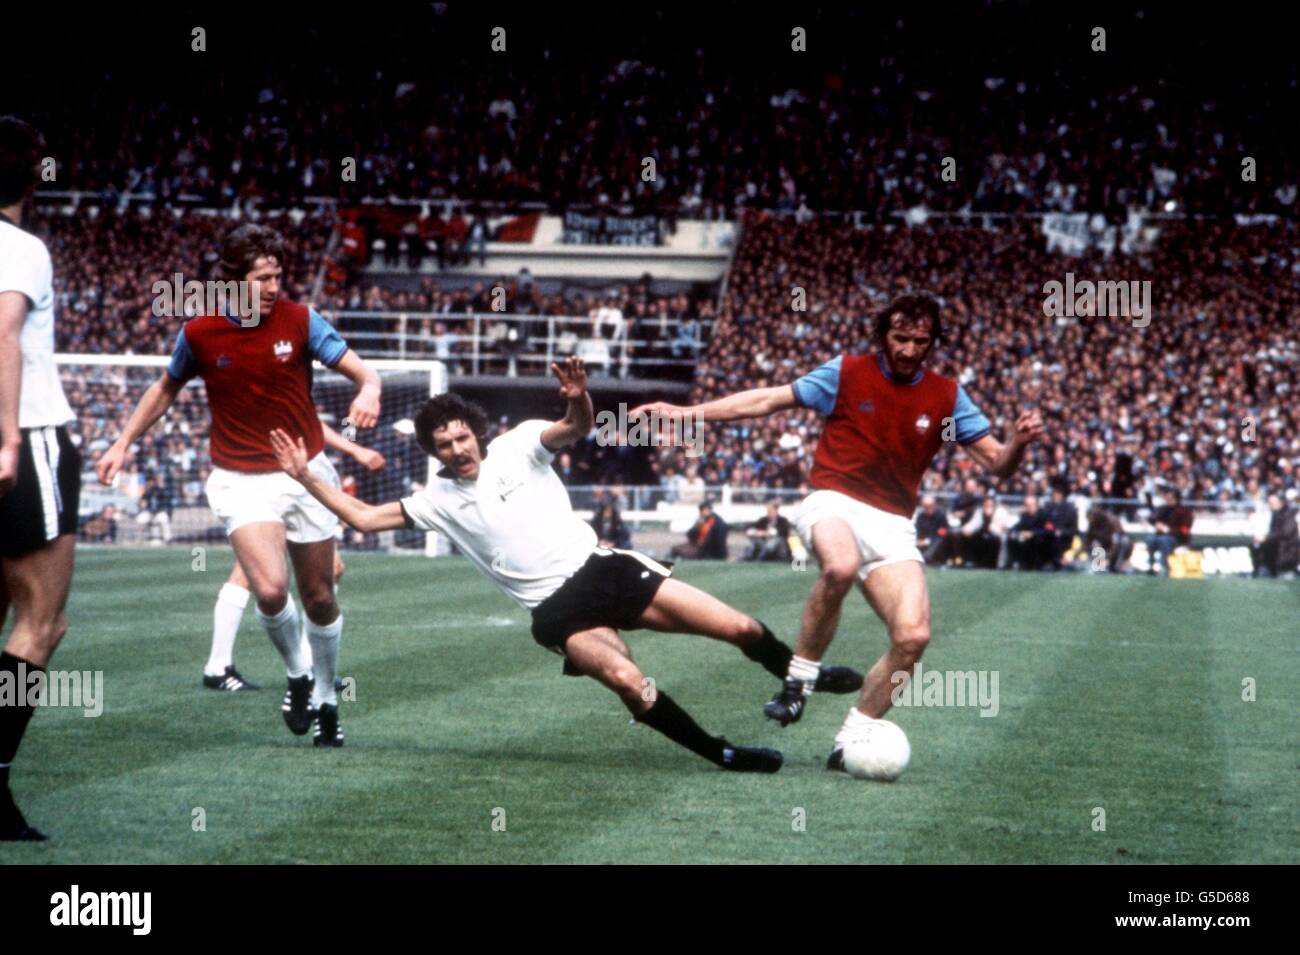 Soccer - FA Cup Final - West Ham United v Fulham. Tommy Taylor and Billy Bonds both West Ham United, Surround John Lacy of Fulham Stock Photo